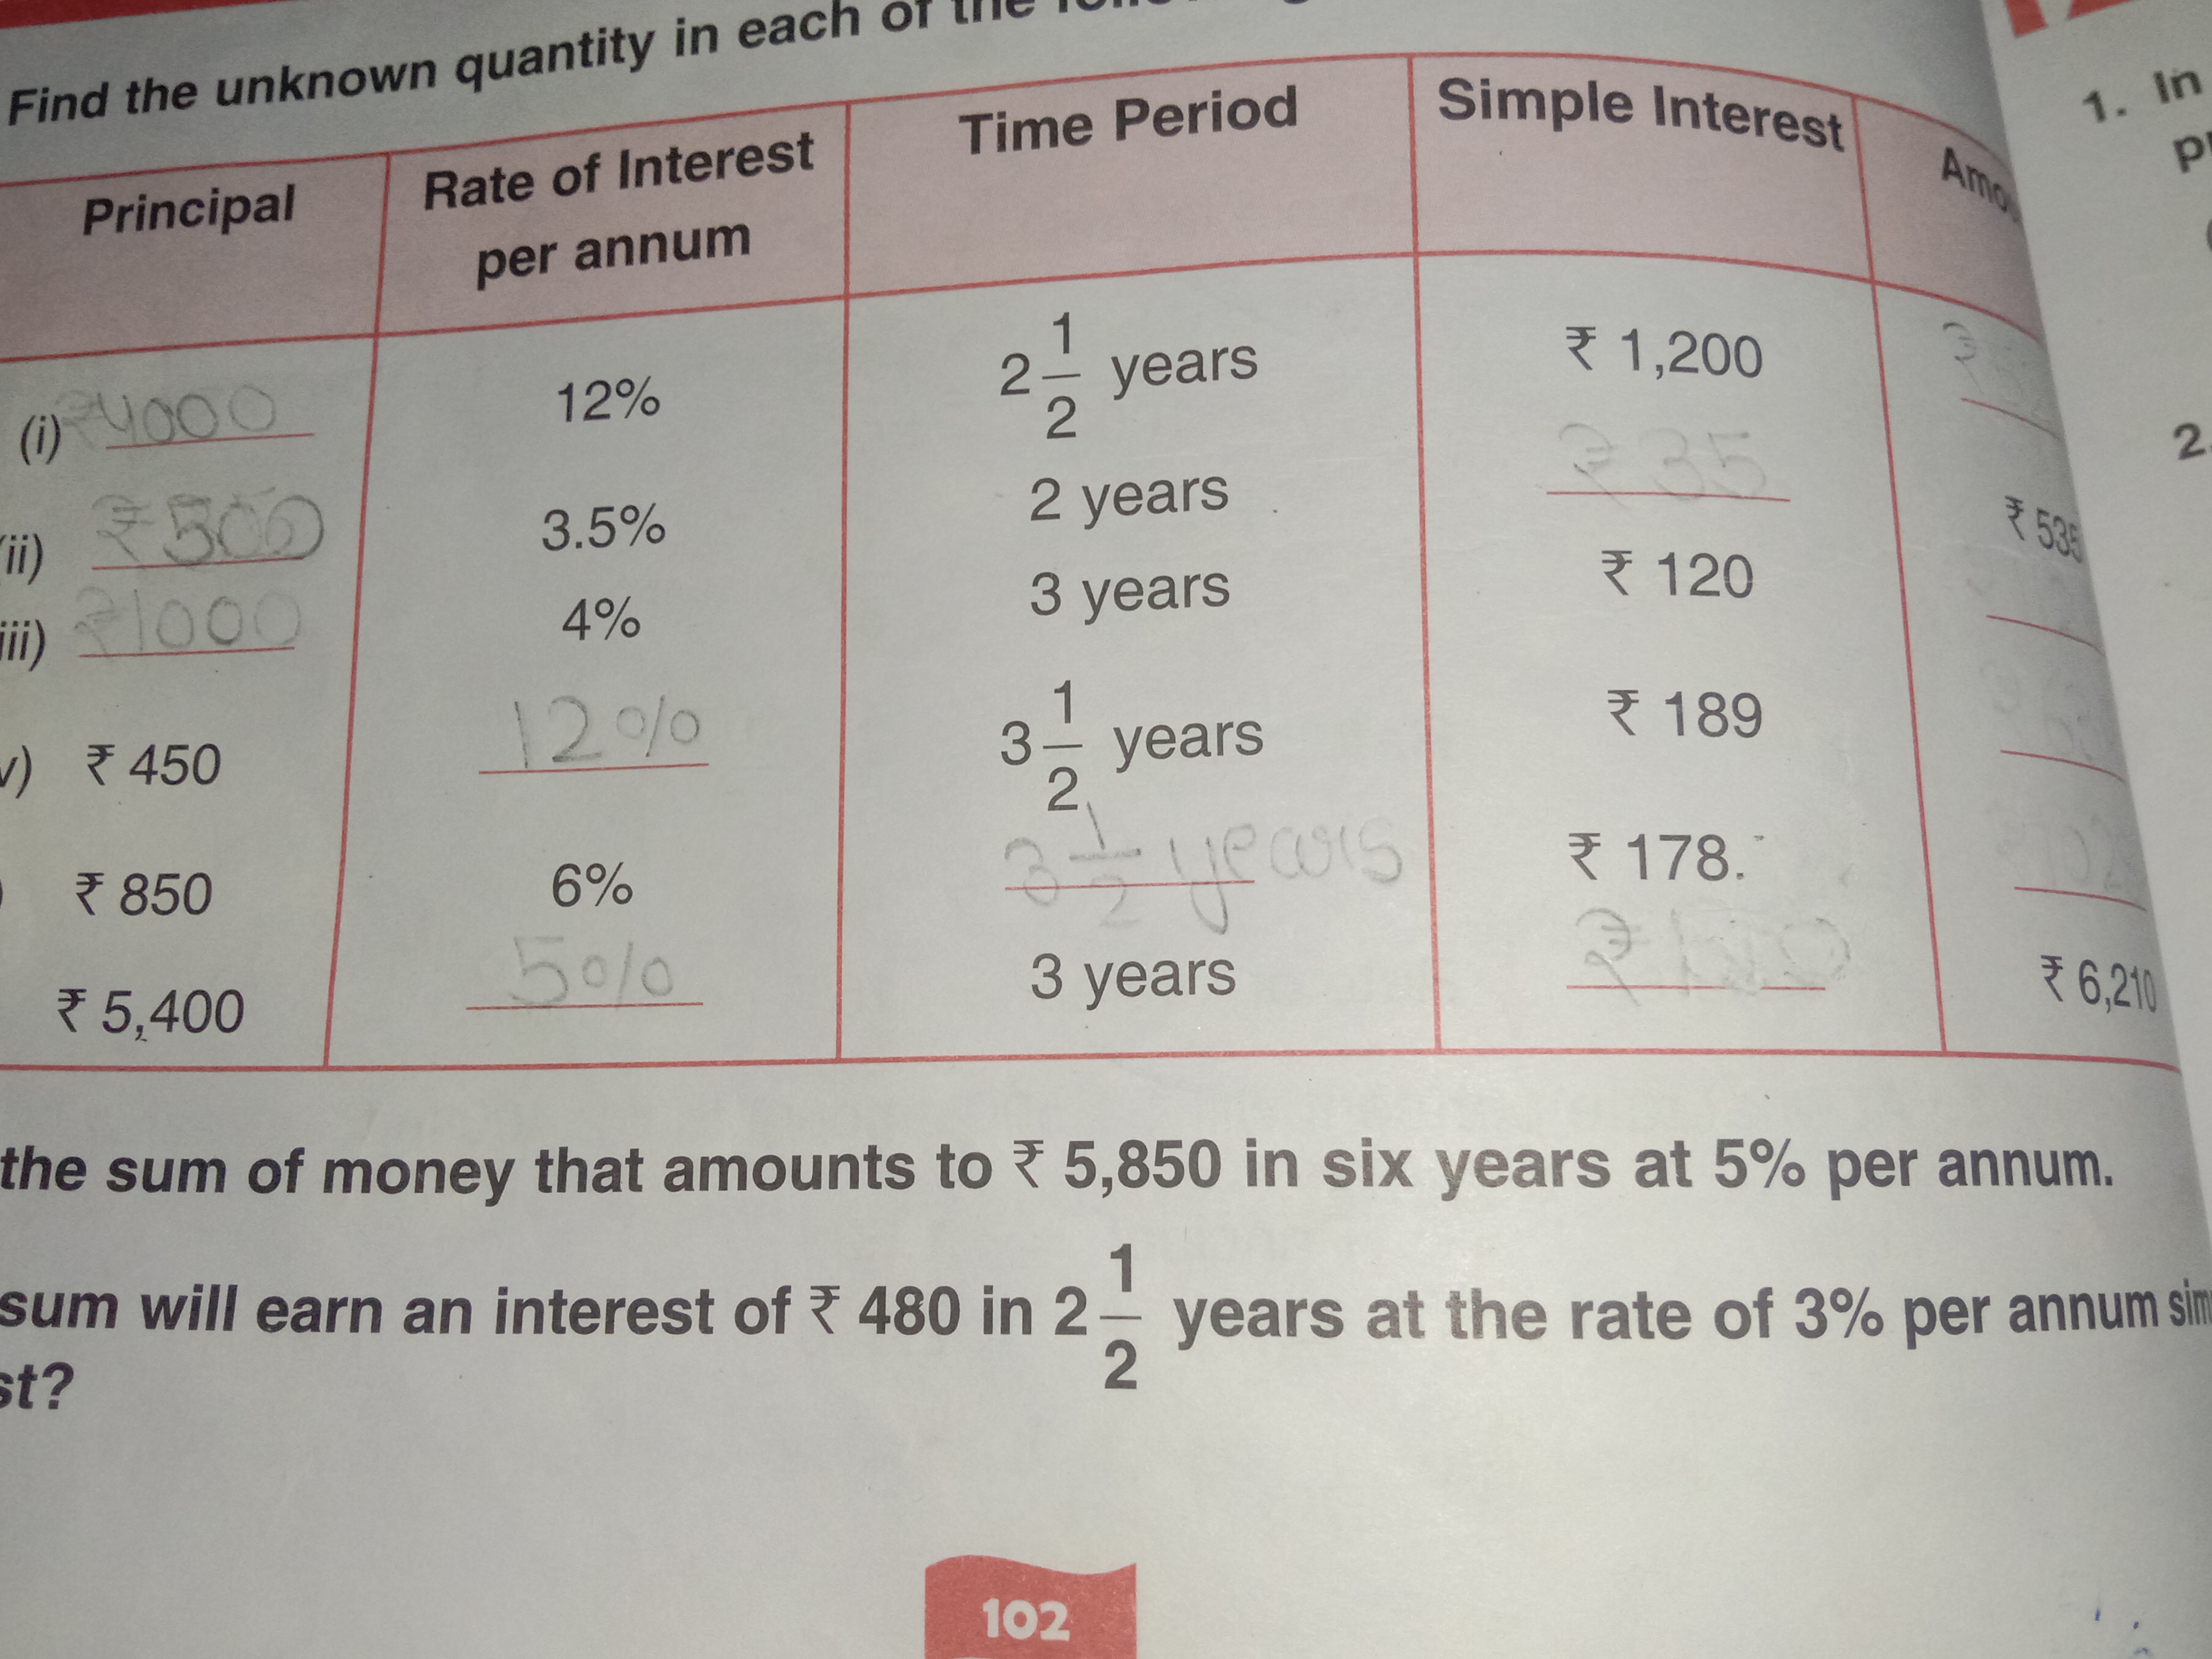 Find the unknown quantity in each
the sum of money that amounts to ₹ 5